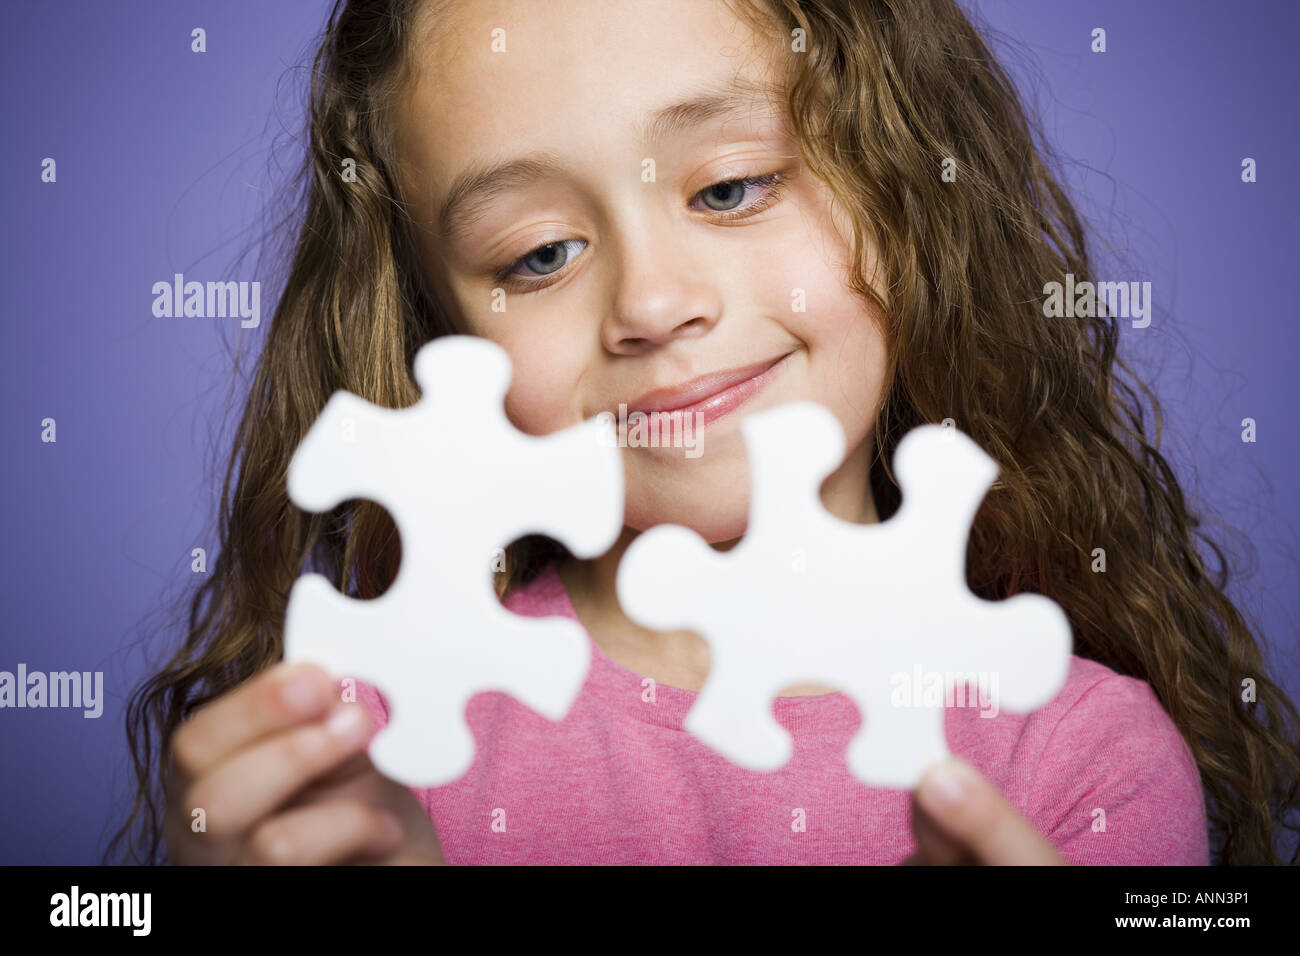 Close up of a girl holding a puzzle piece Stock Photo